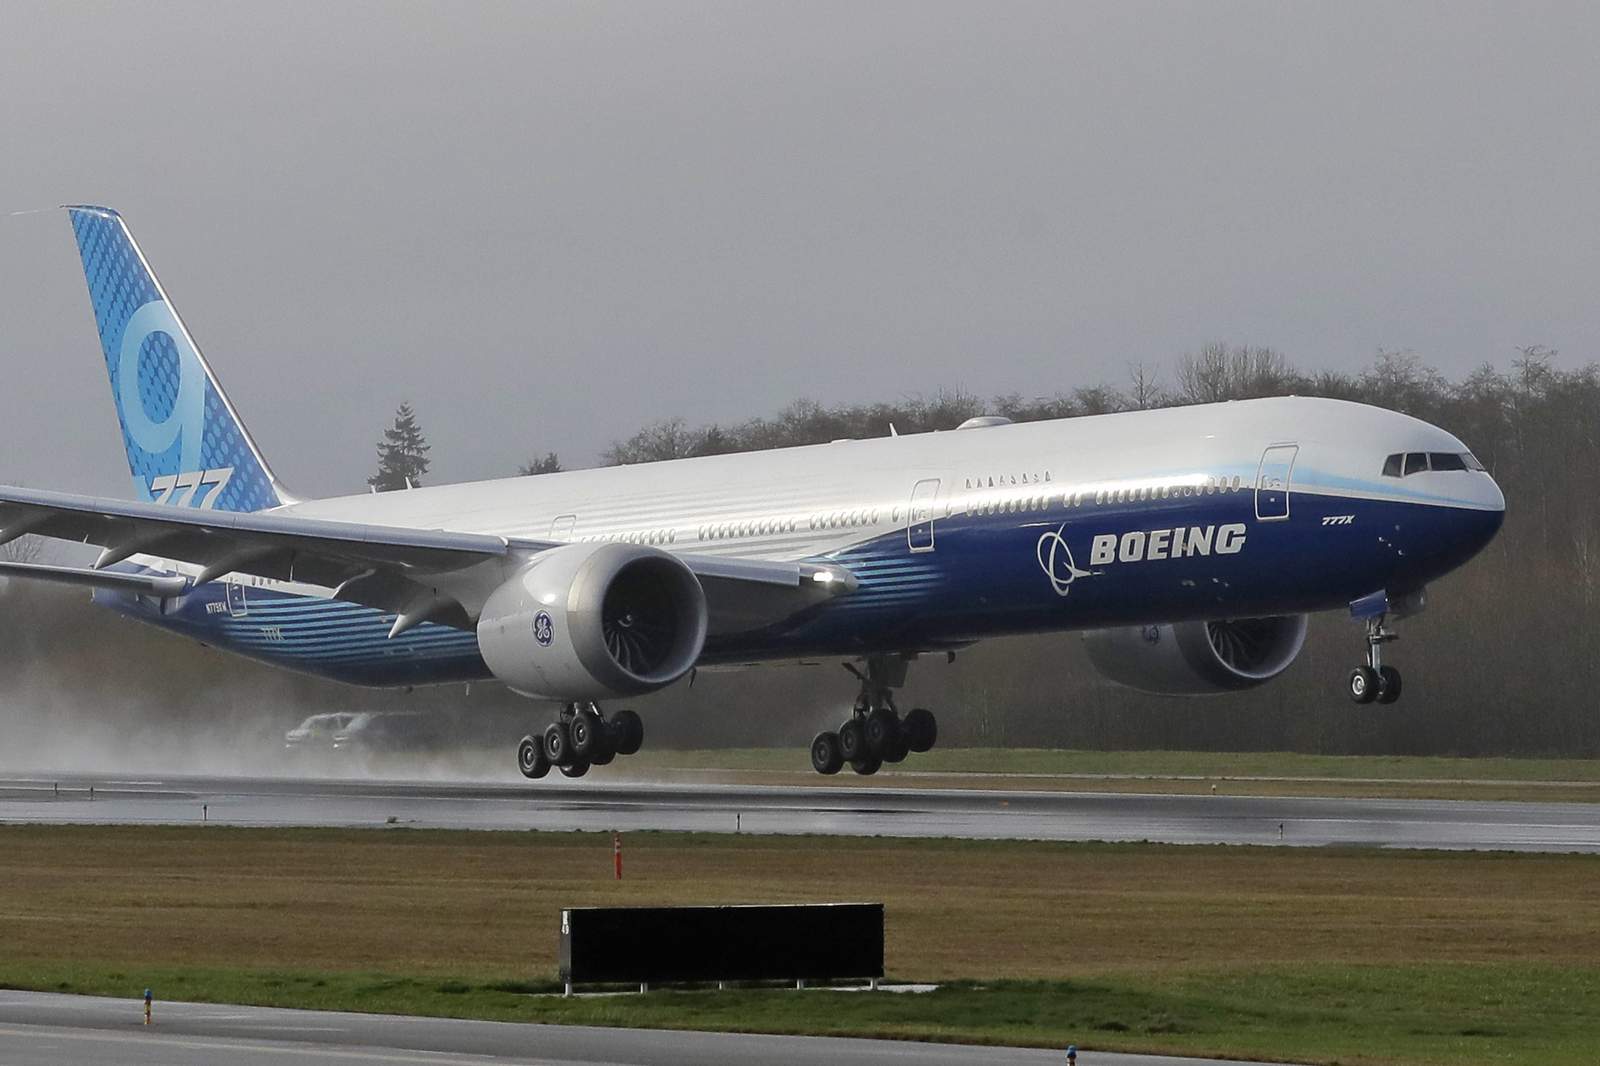 Report: Boeing fell short in disclosing key changes to Max